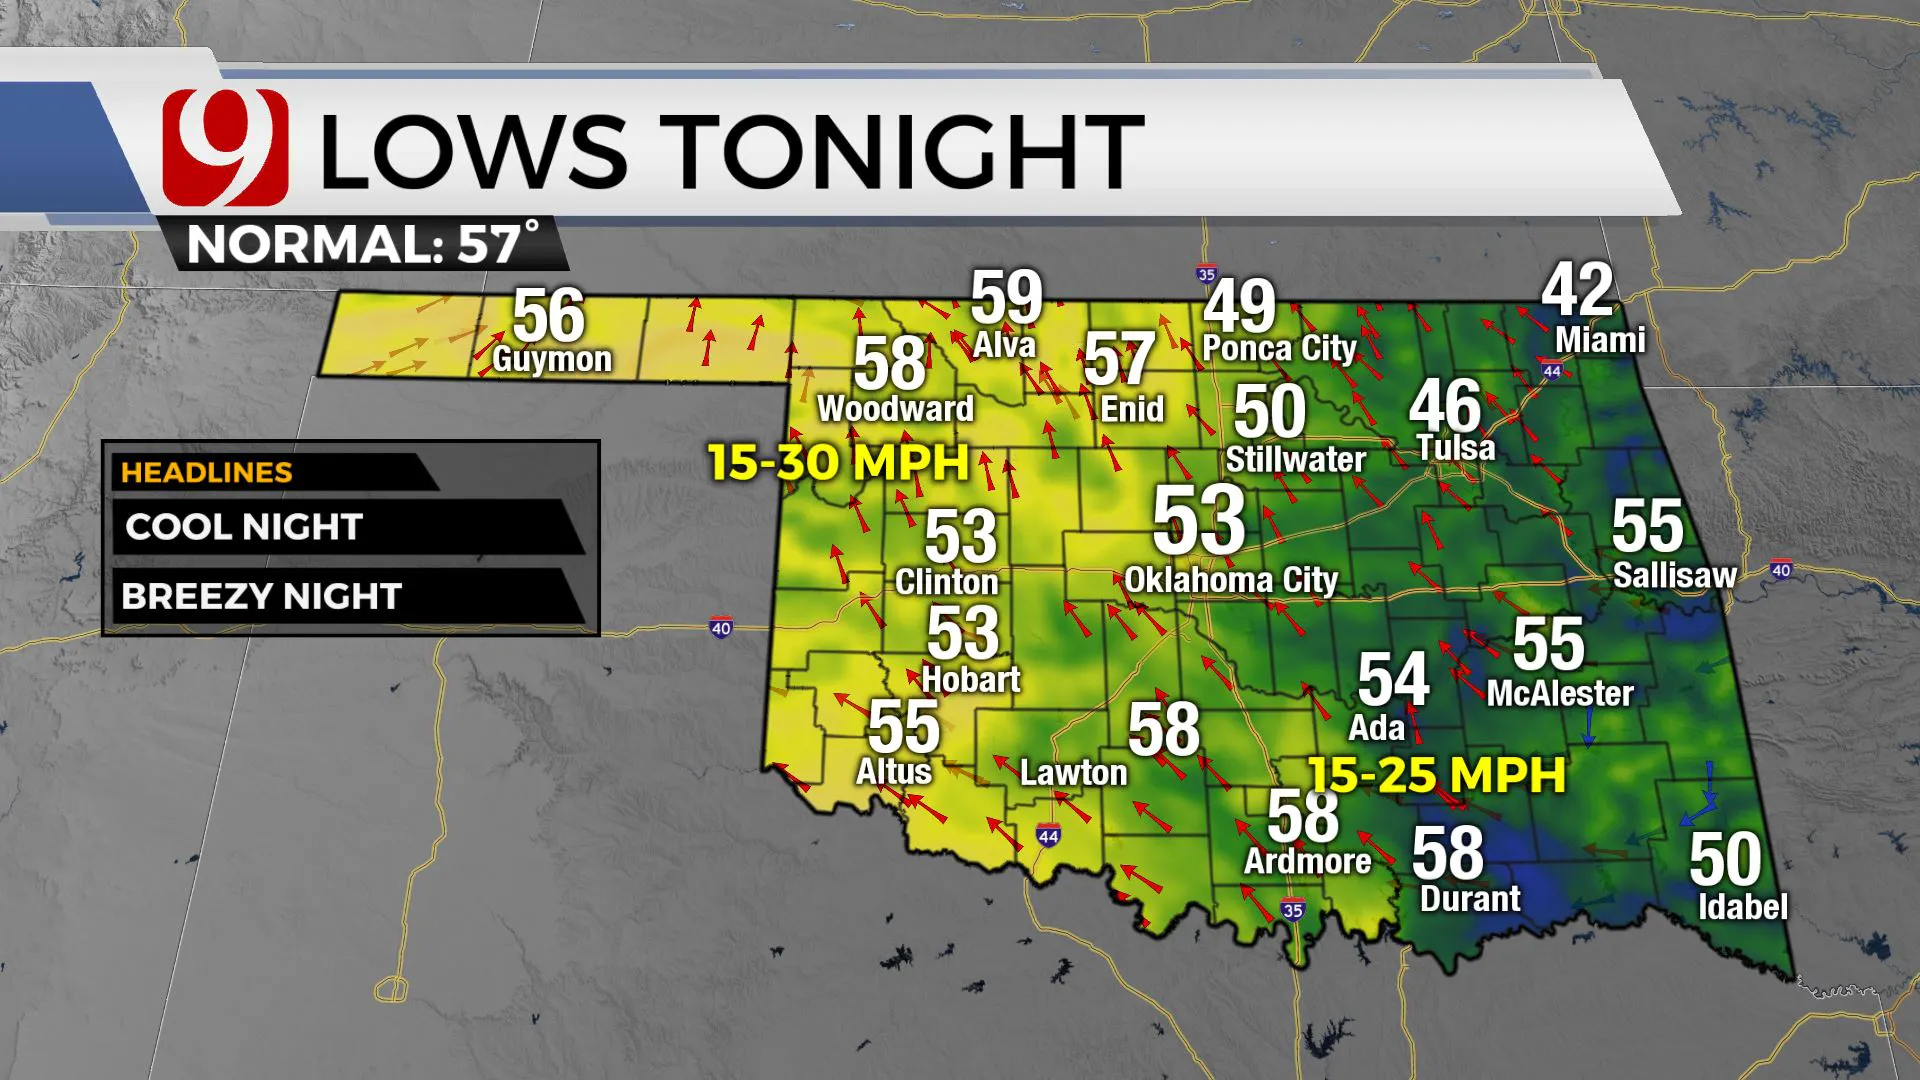 Lows tonight across the state.